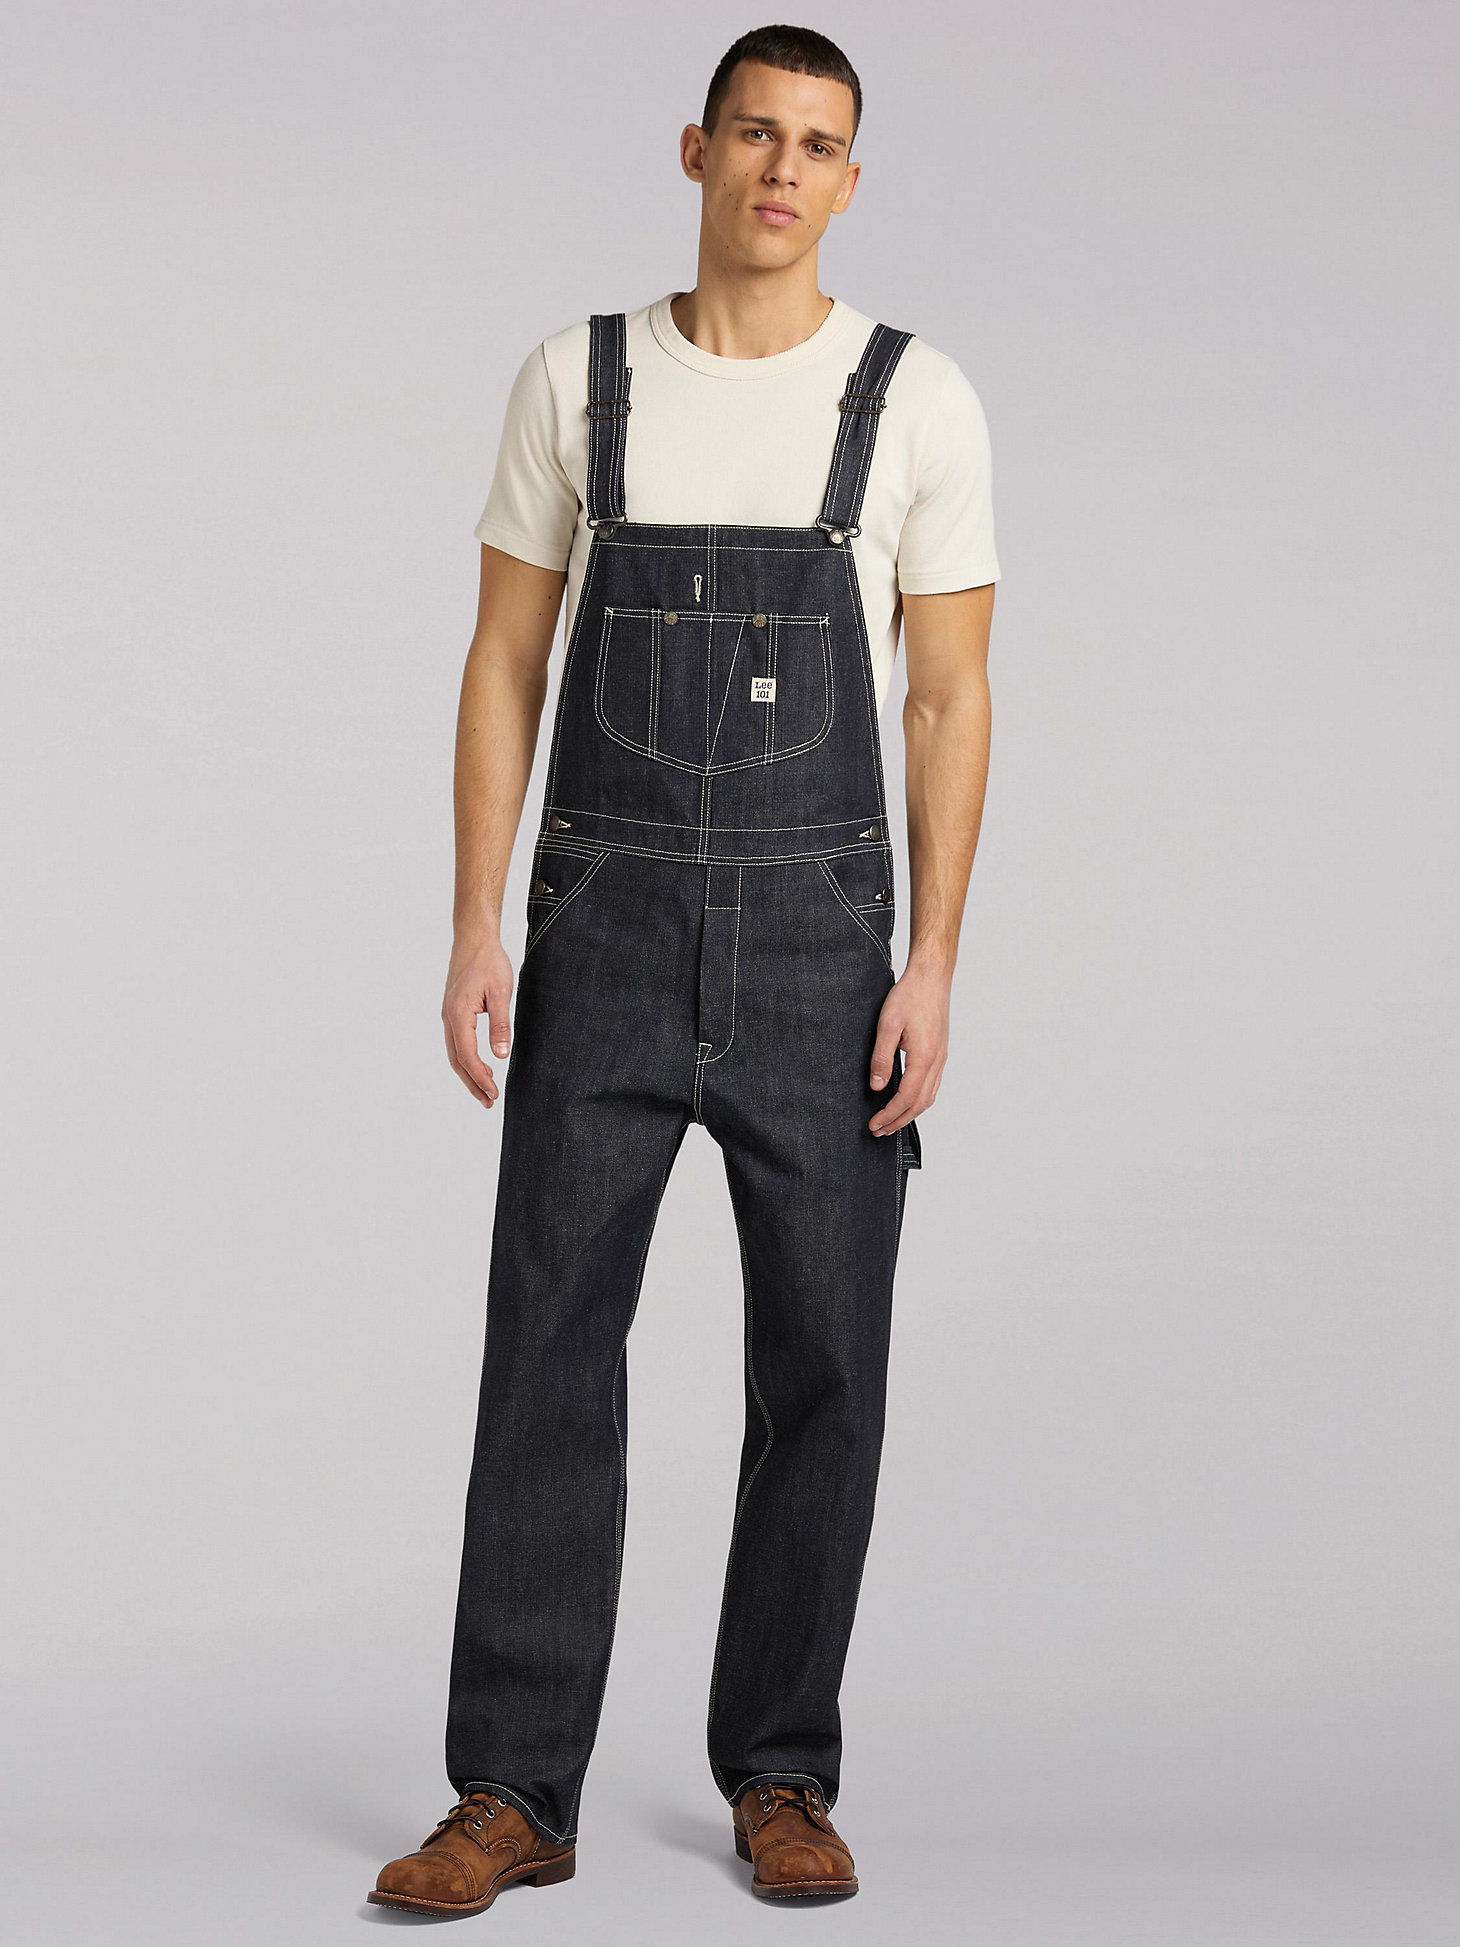 Men's Lee 101 Relaxed Fit Bib Overall in Dry main view